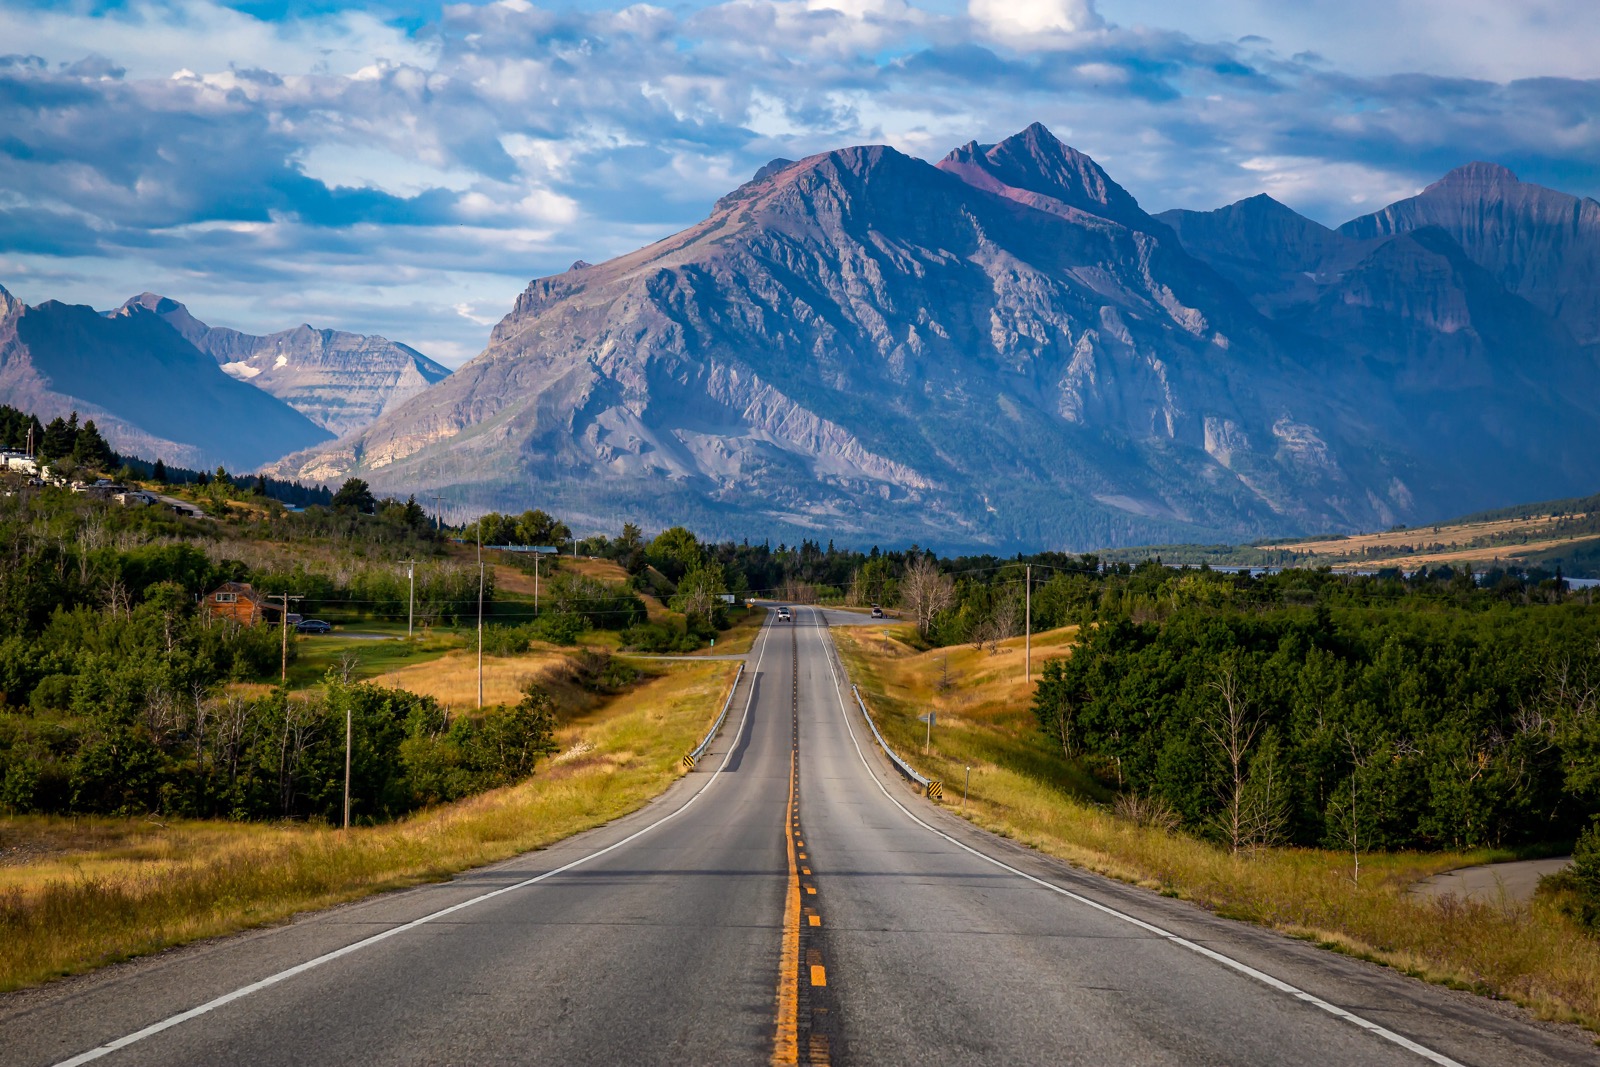 Create Your Dream 🚗 USA Road Trip to Find Out What Season Your Soul Aligns With Rocky Mountains, Montana, United States.